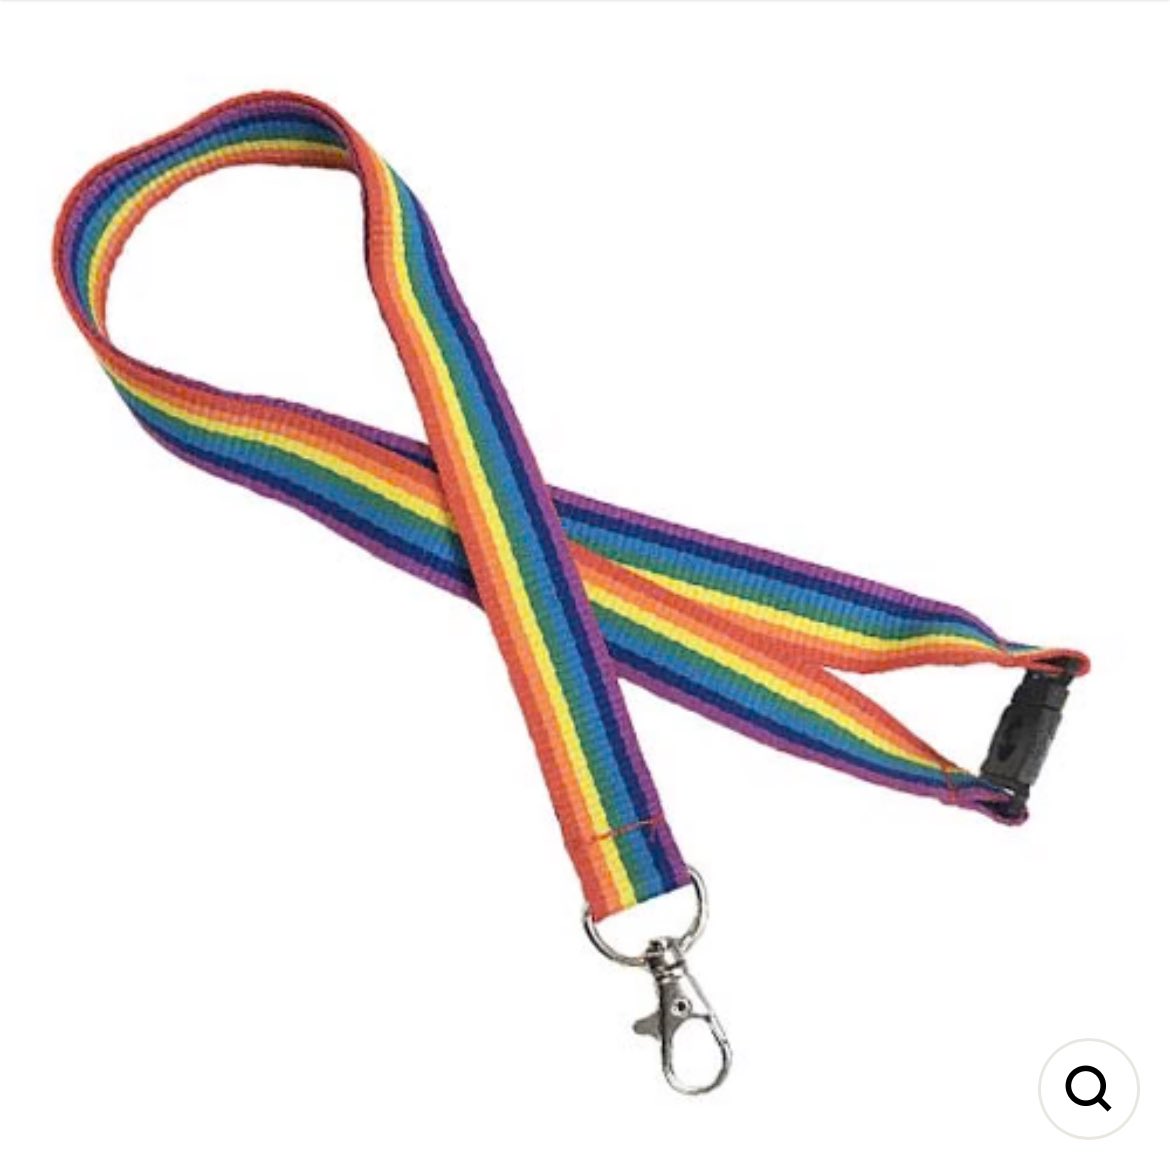 If 👇🏼 is a “political statement”…… Lanyard🧵!